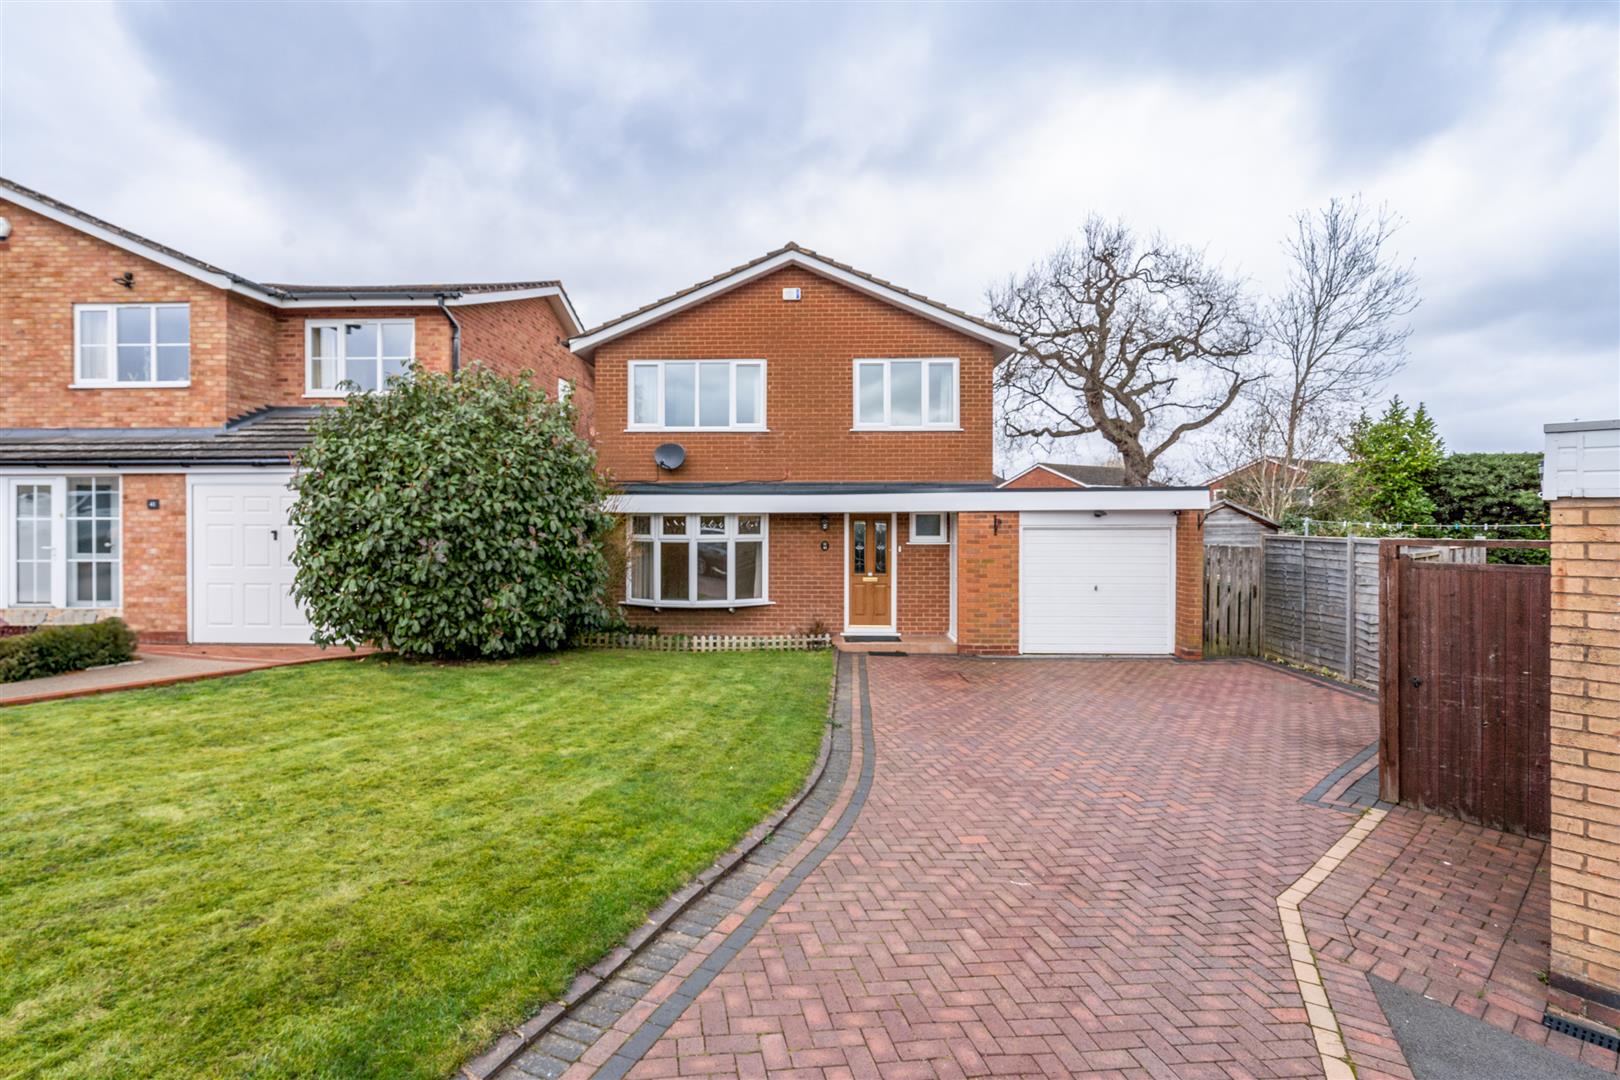 4 bed detached house for sale in Barcheston Road, Solihull  - Property Image 1